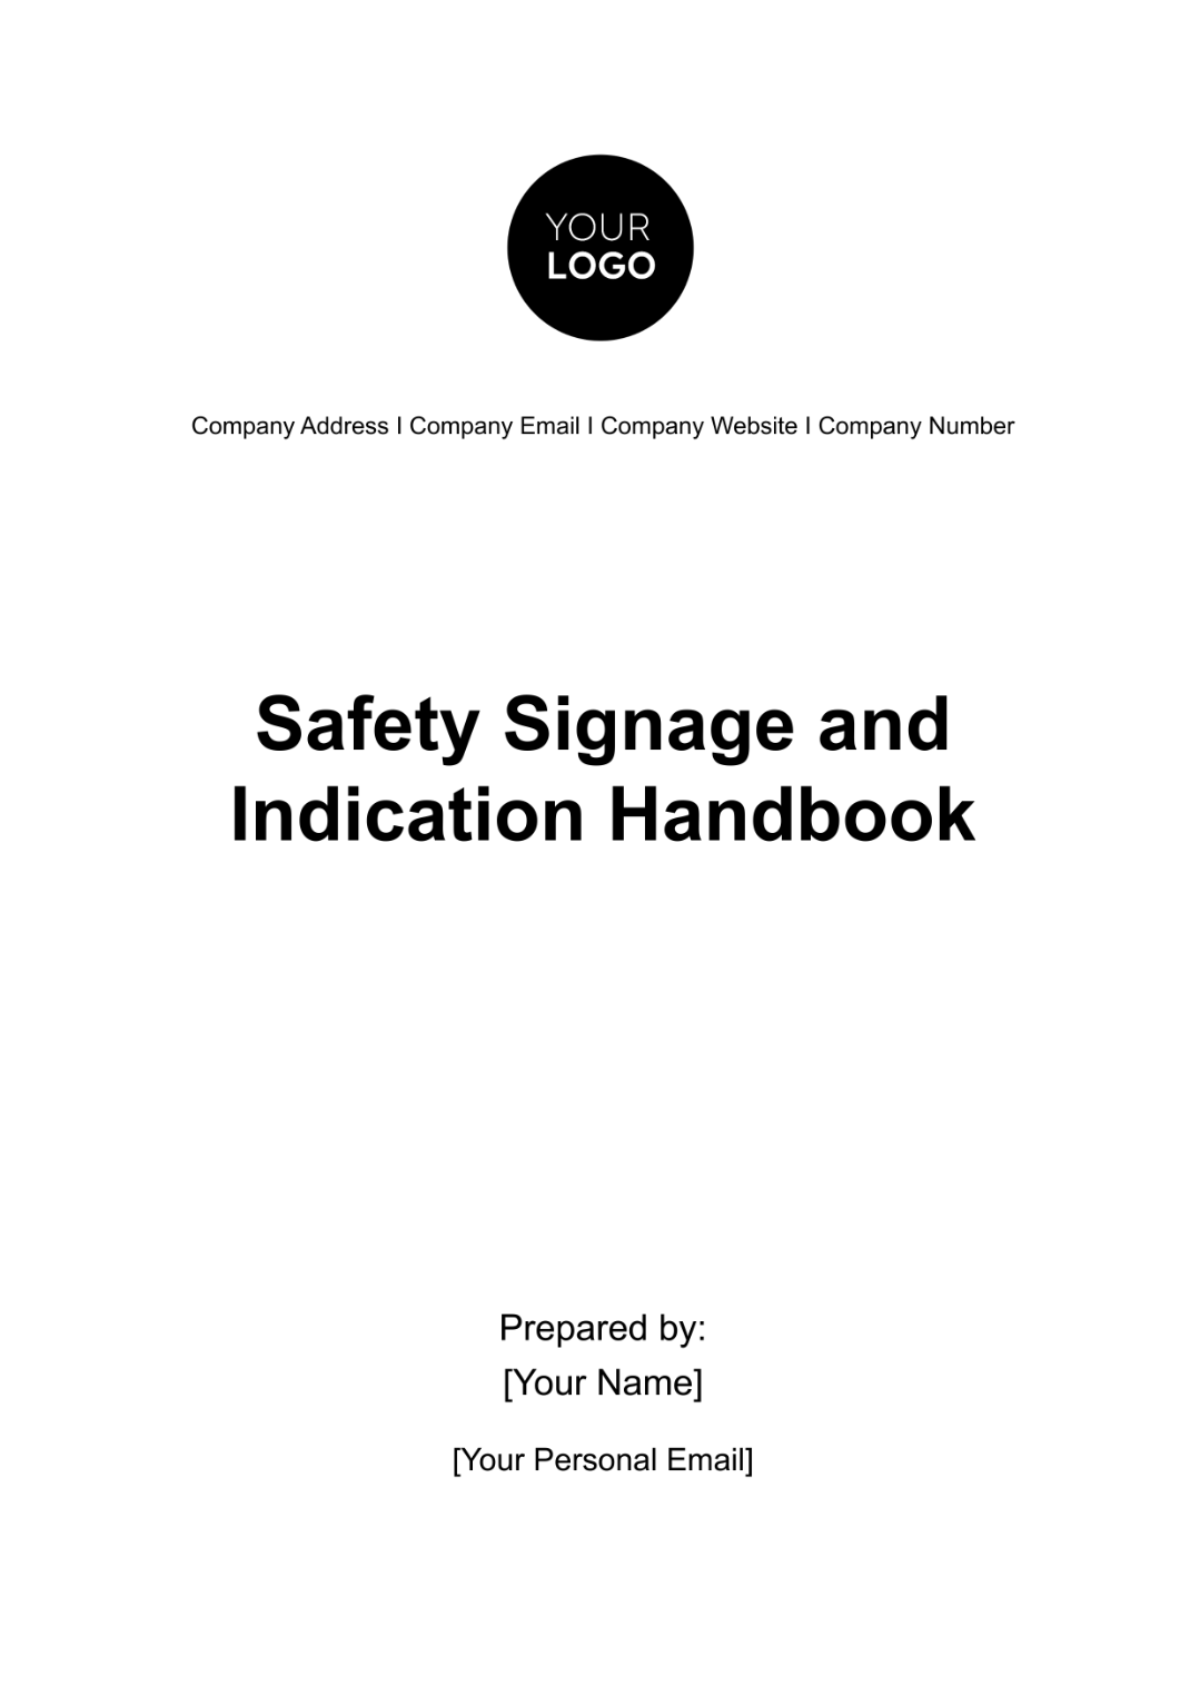 Safety Signage and Indication Handbook HR Template